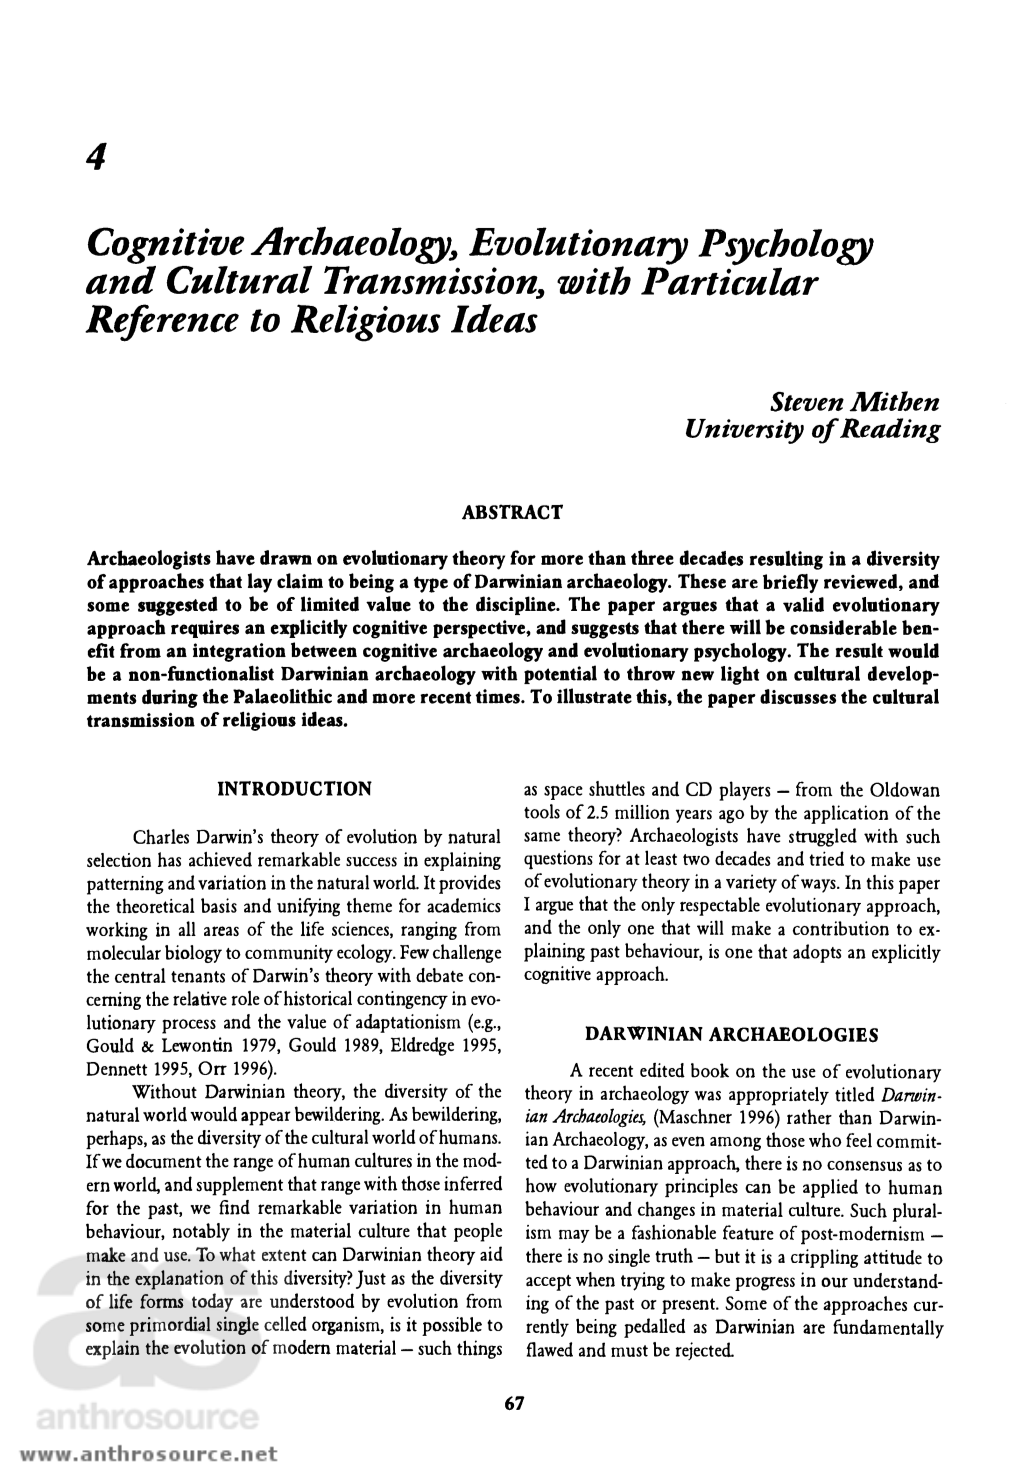 Cognitive Archaeology, Evolutionary Psychology and Cultural Transmission, with Particular Reference to Religious Ideas